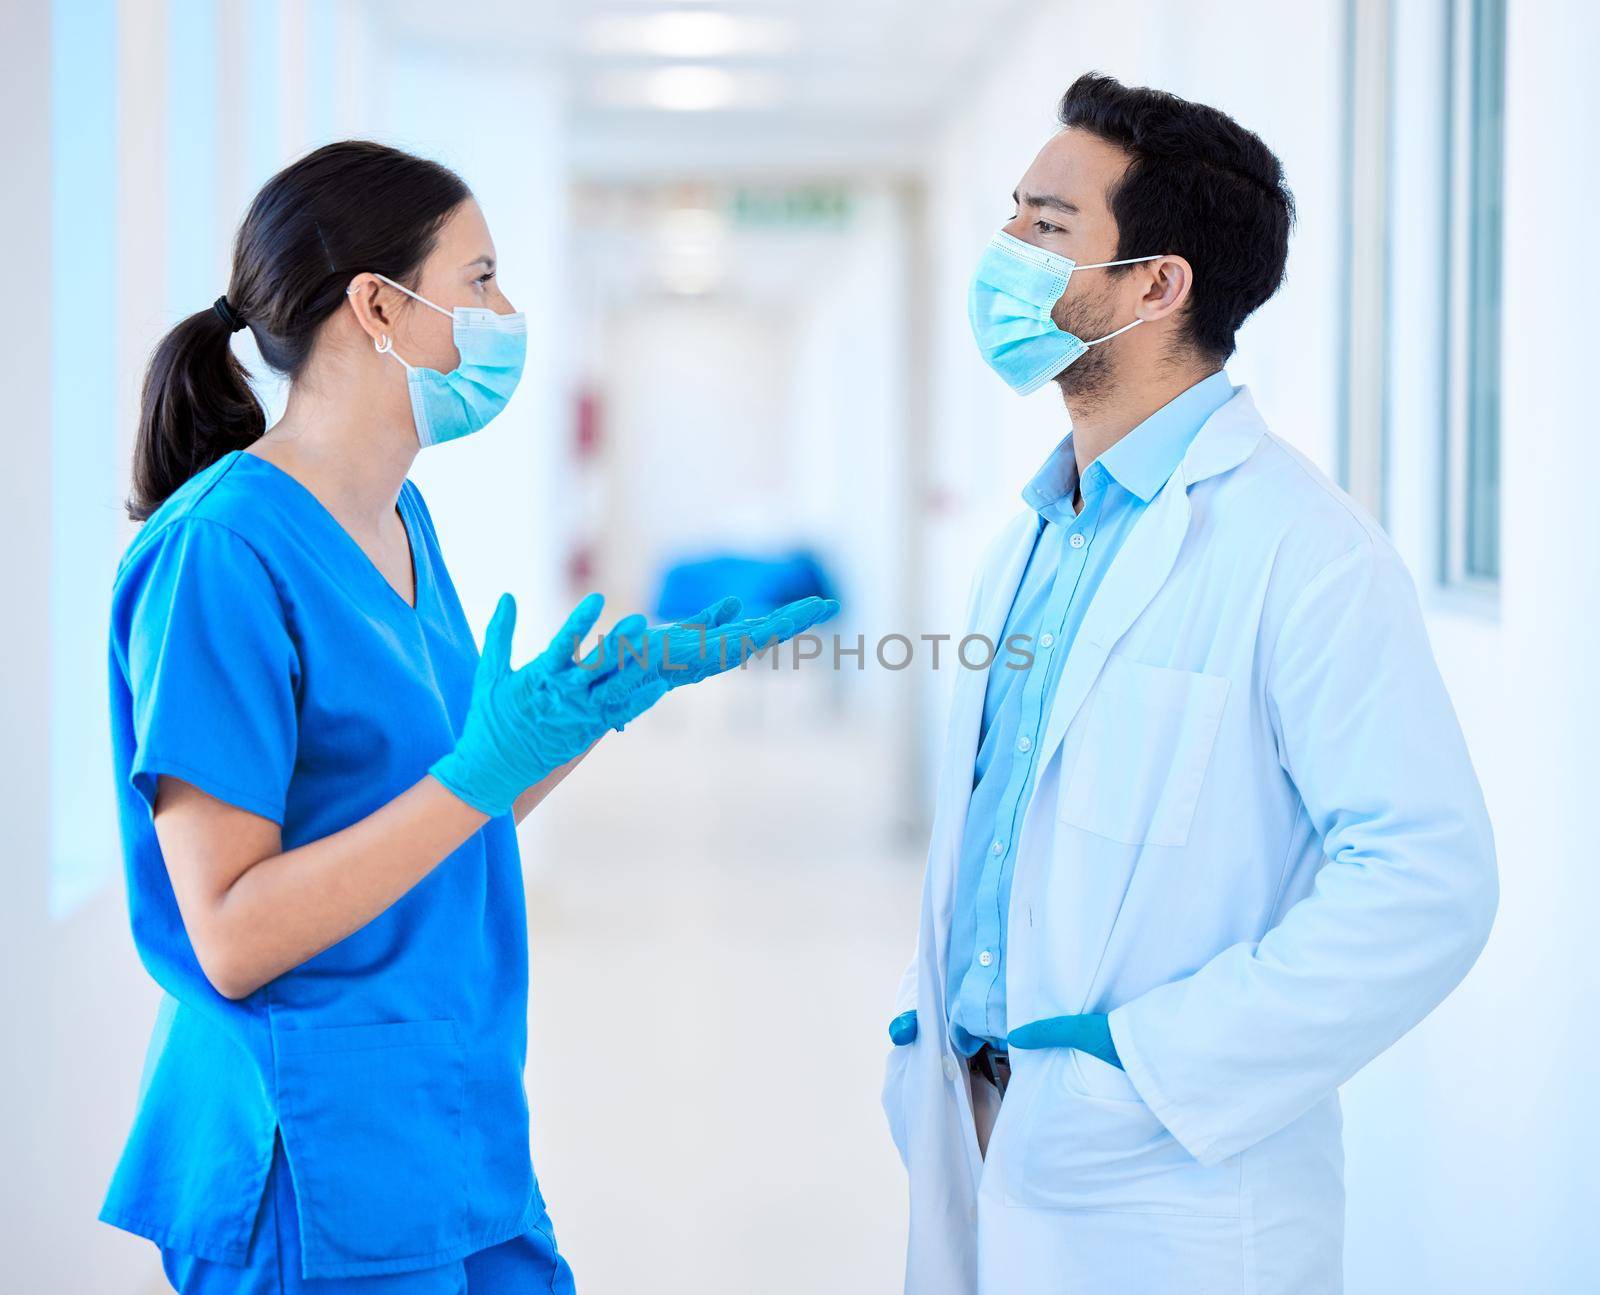 a young dentist speaking to his assistant.